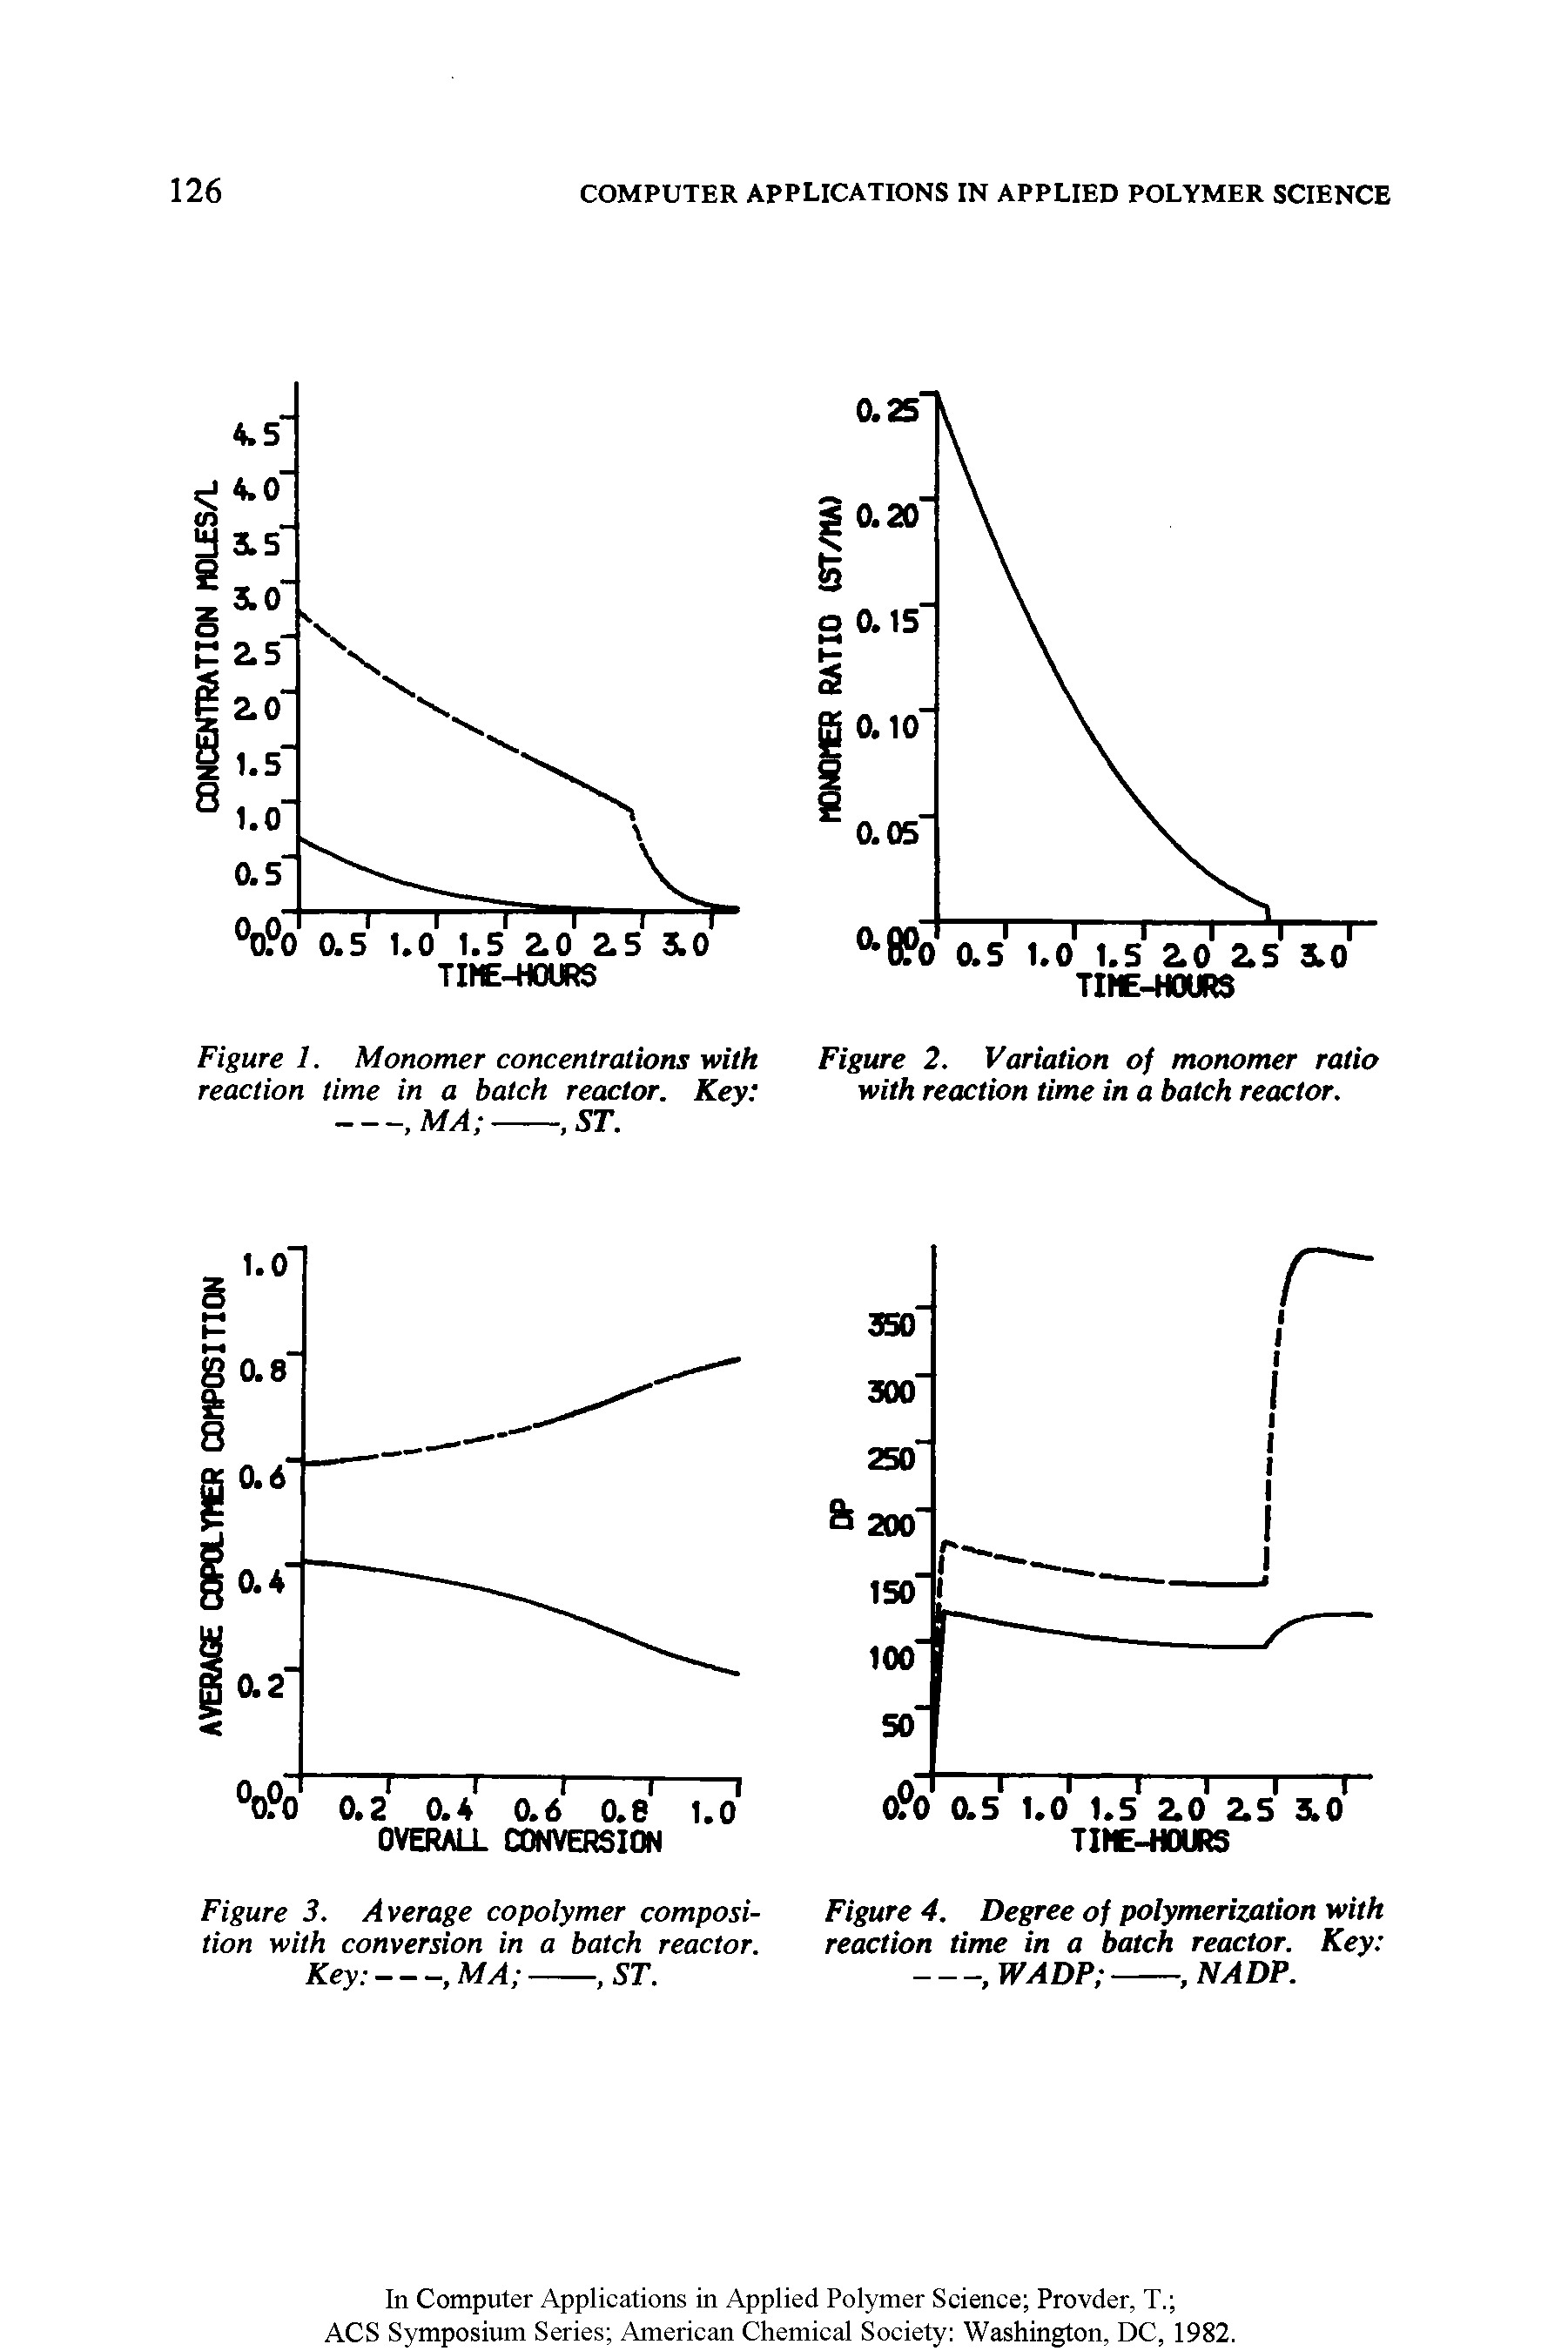 Figure 1. Monomer concentrations with Figure 2. Variation of monomer ratio reaction time in a batch reactor. Key with reaction time in a batch reactor.